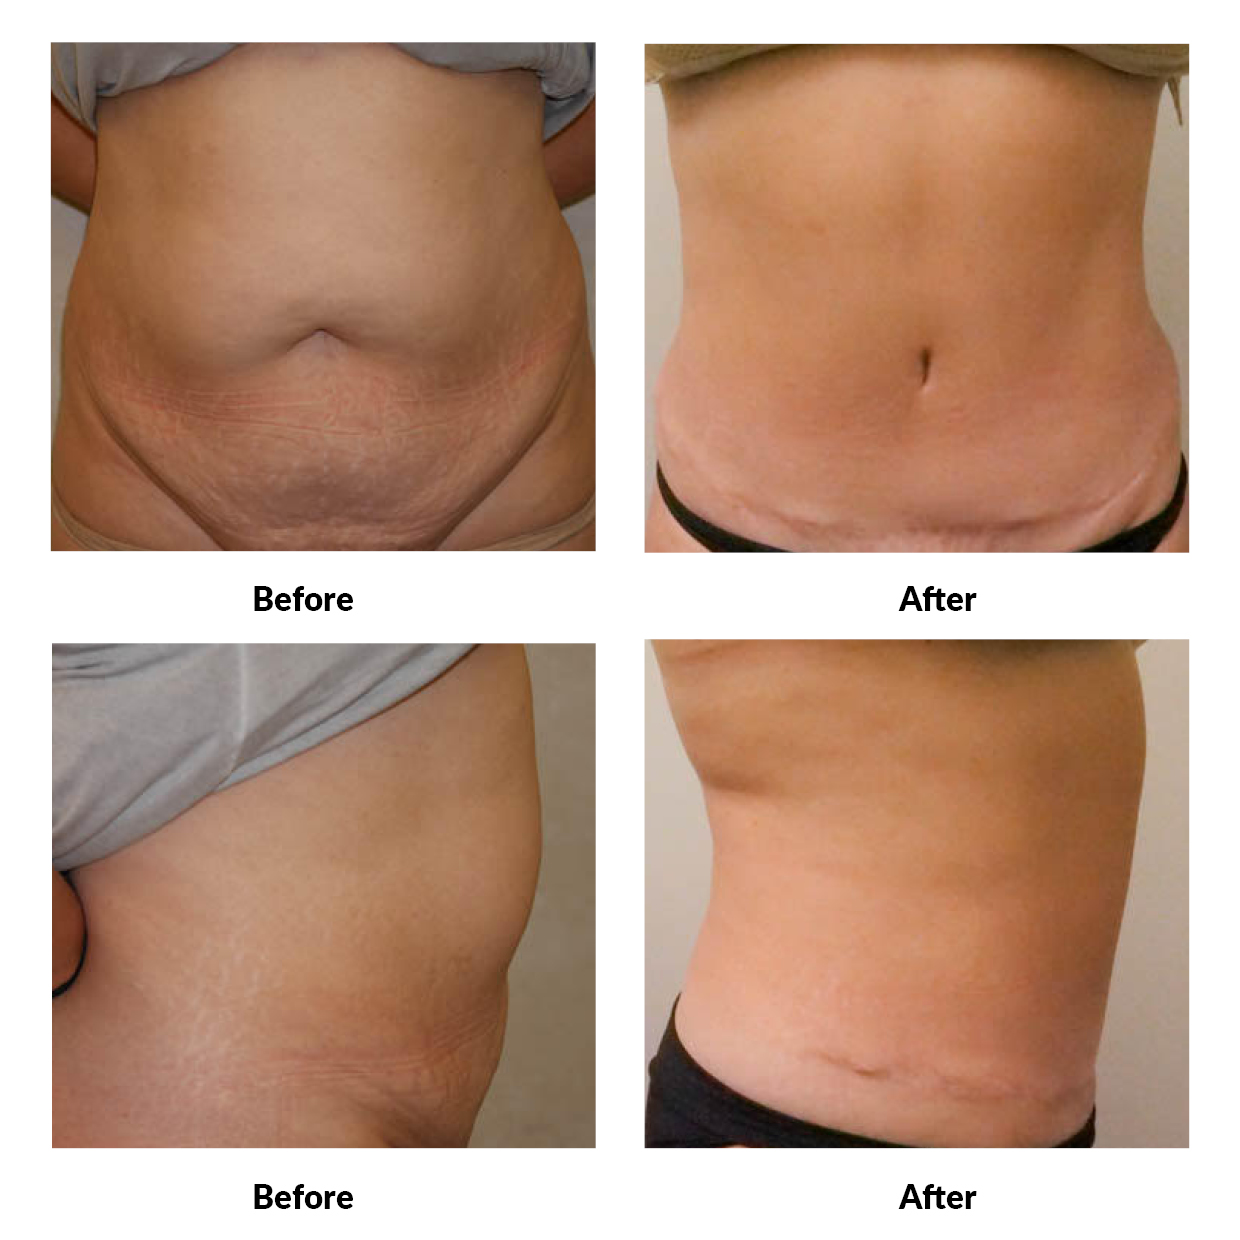 dermatology and surgery associates tummy tuck before and after bronx ny